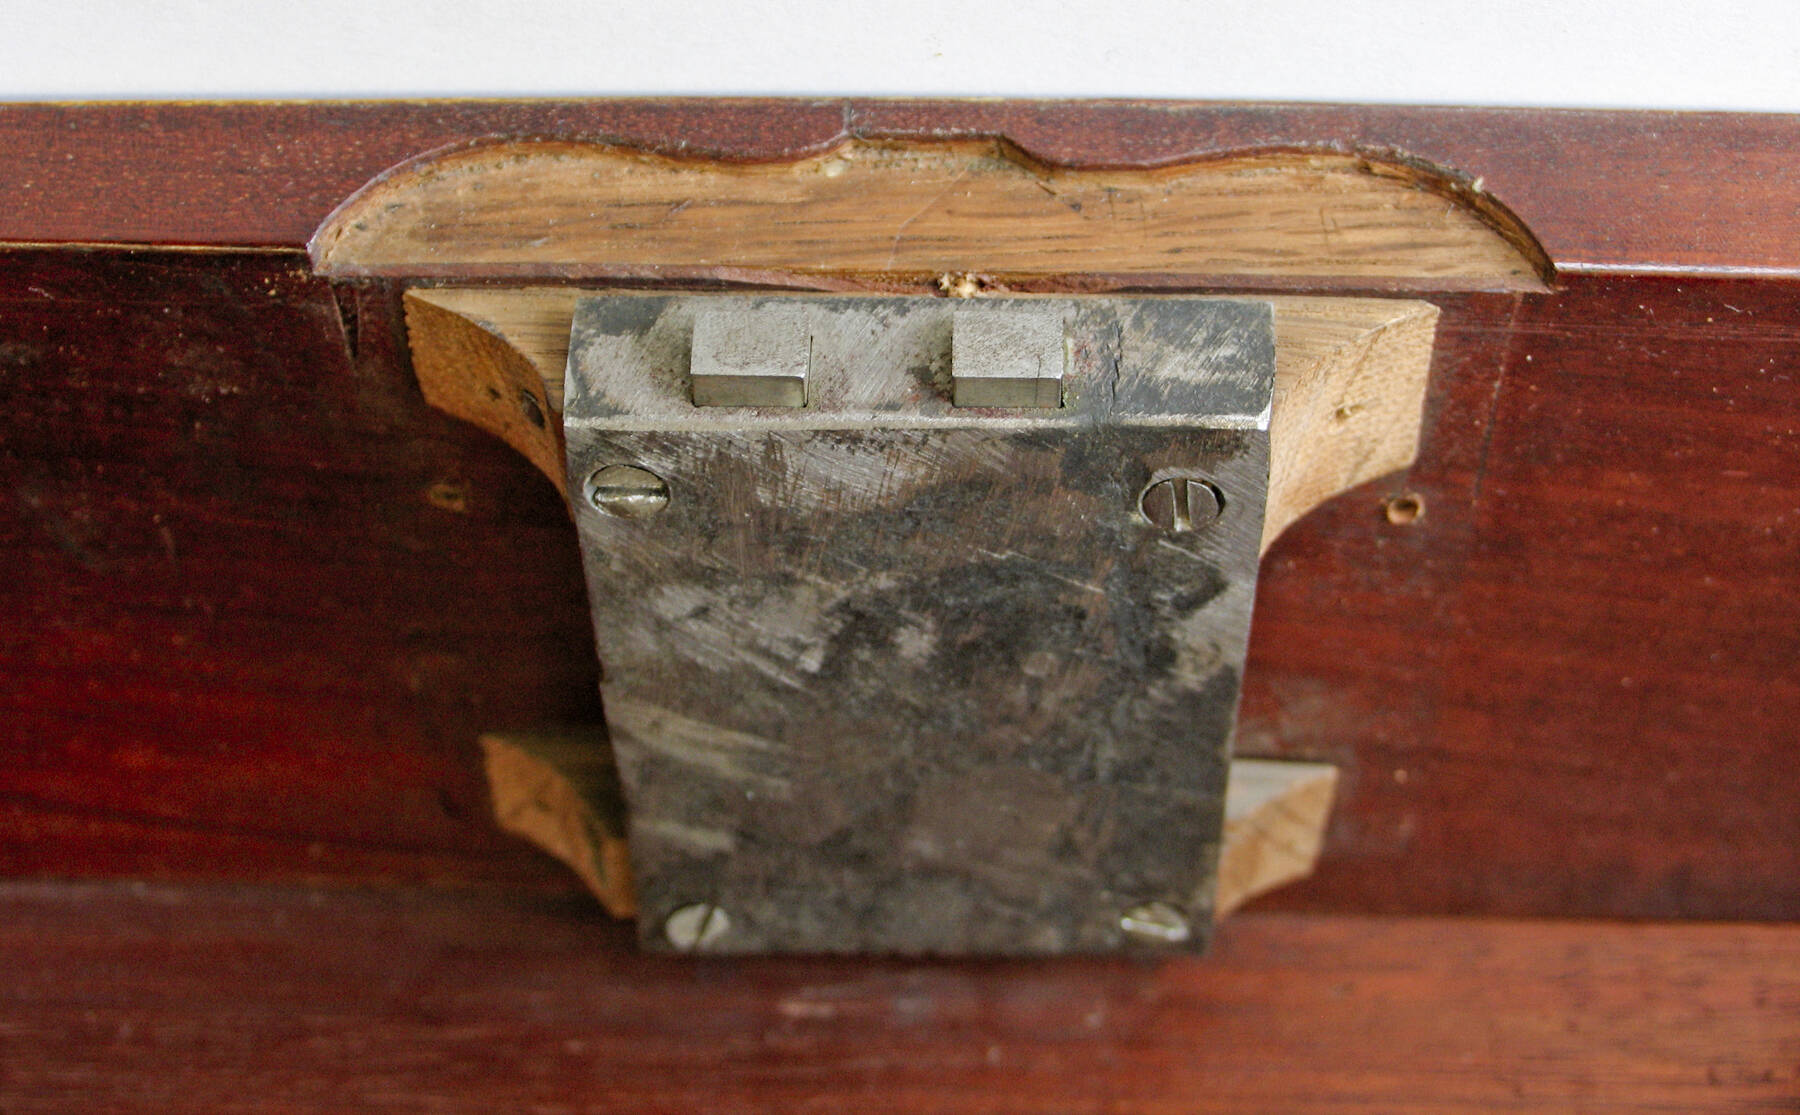 detail of one of the locking mechanisms, constructed of an iron rectangle with a nail at each corner and two smaller squares protruding from the top